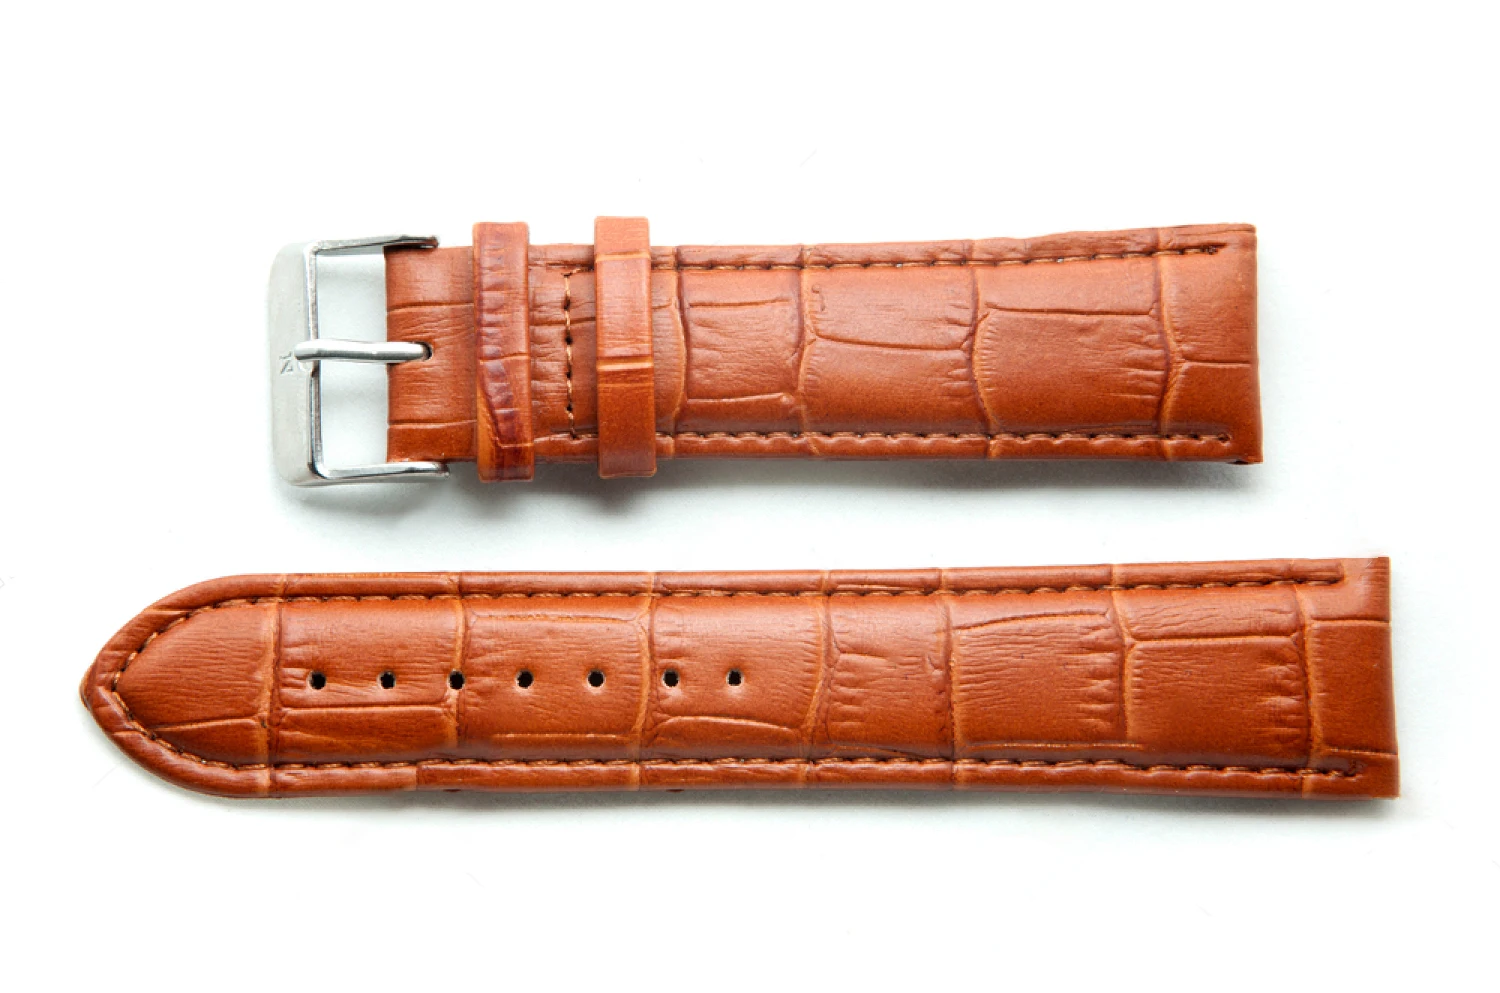 leather watch band strap compatible with all model GMWB5000MB-1 GMWB5000GD-9 GMWB5000-1 GMWB5000D-1 AWM500GD-4A GMWB5000GD-4 enlarge